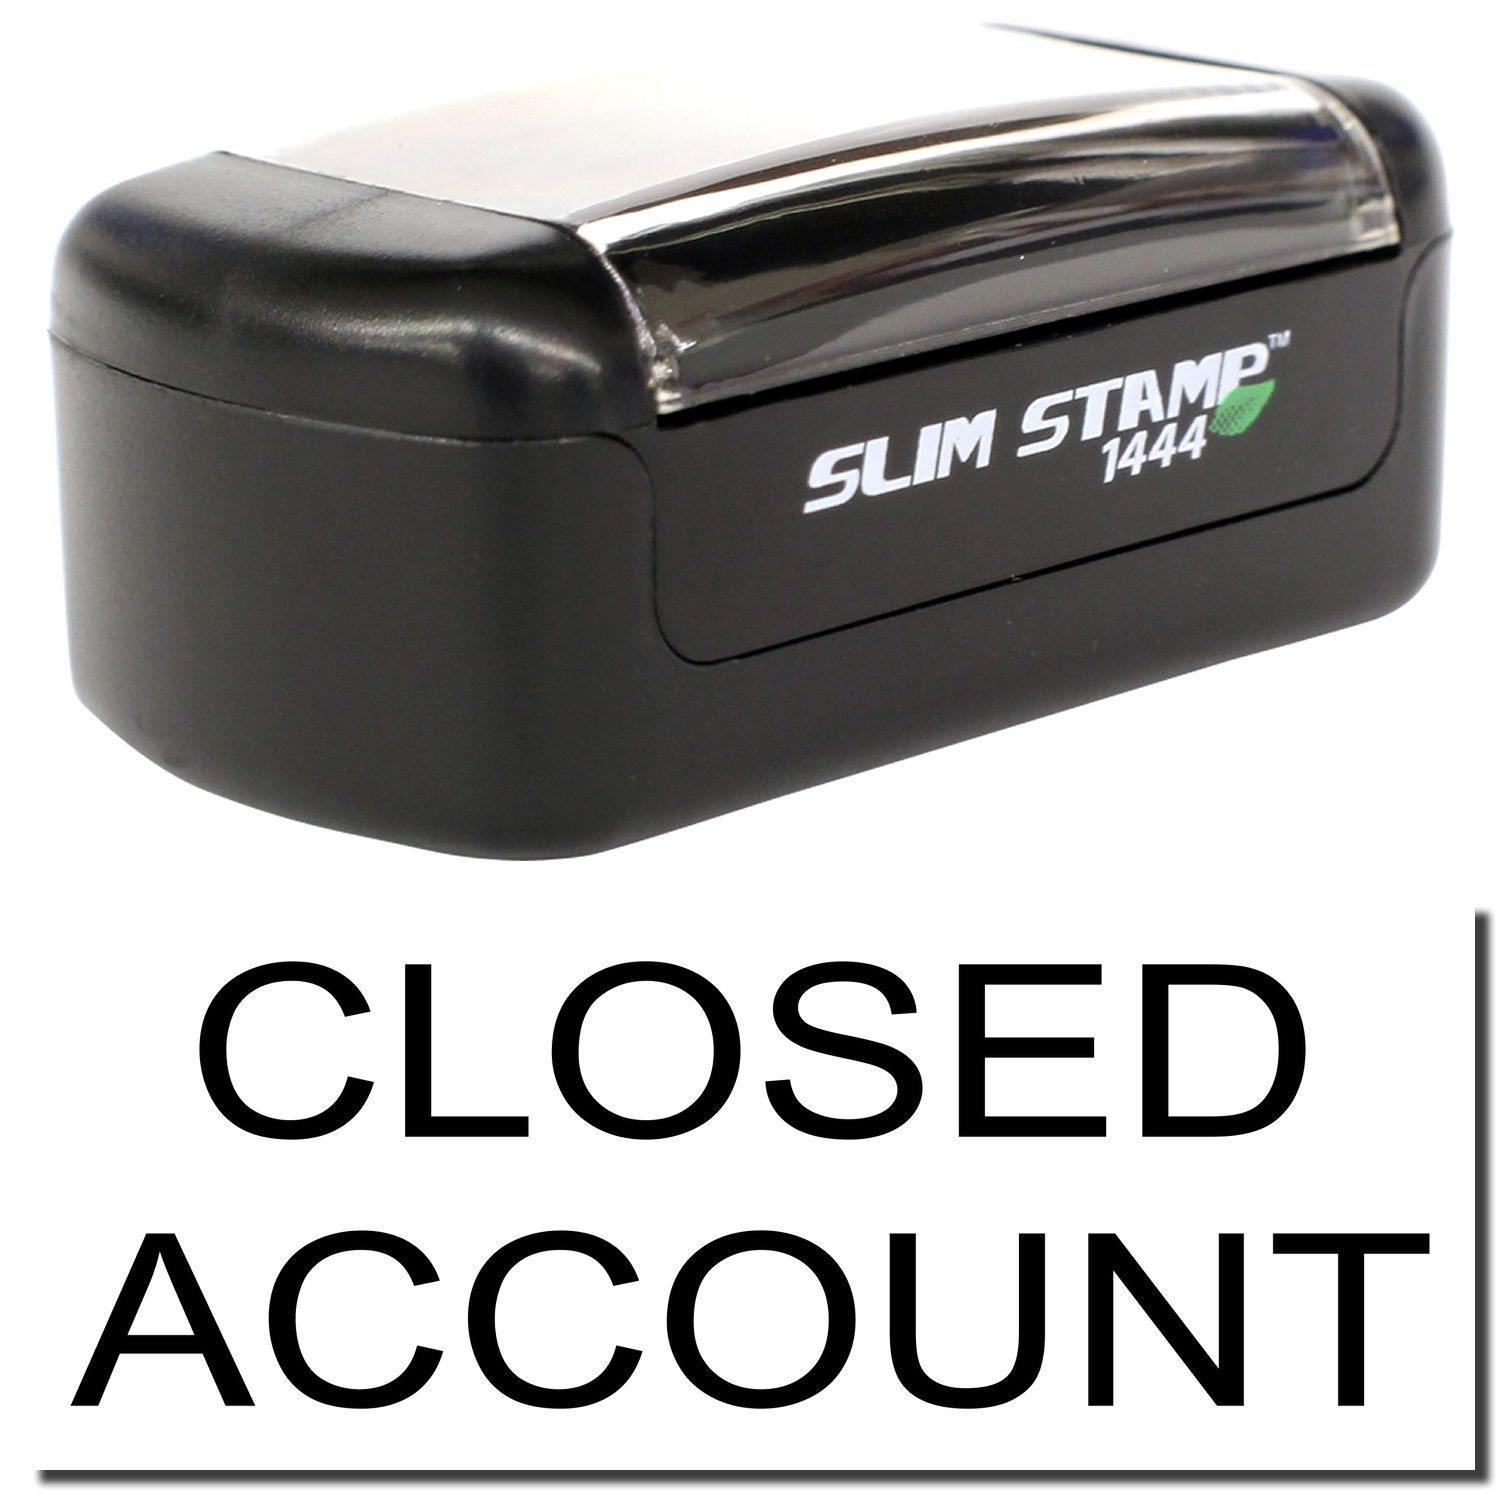 A stock office pre-inked stamp with a stamped image showing how the text "CLOSED ACCOUNT" is displayed after stamping.